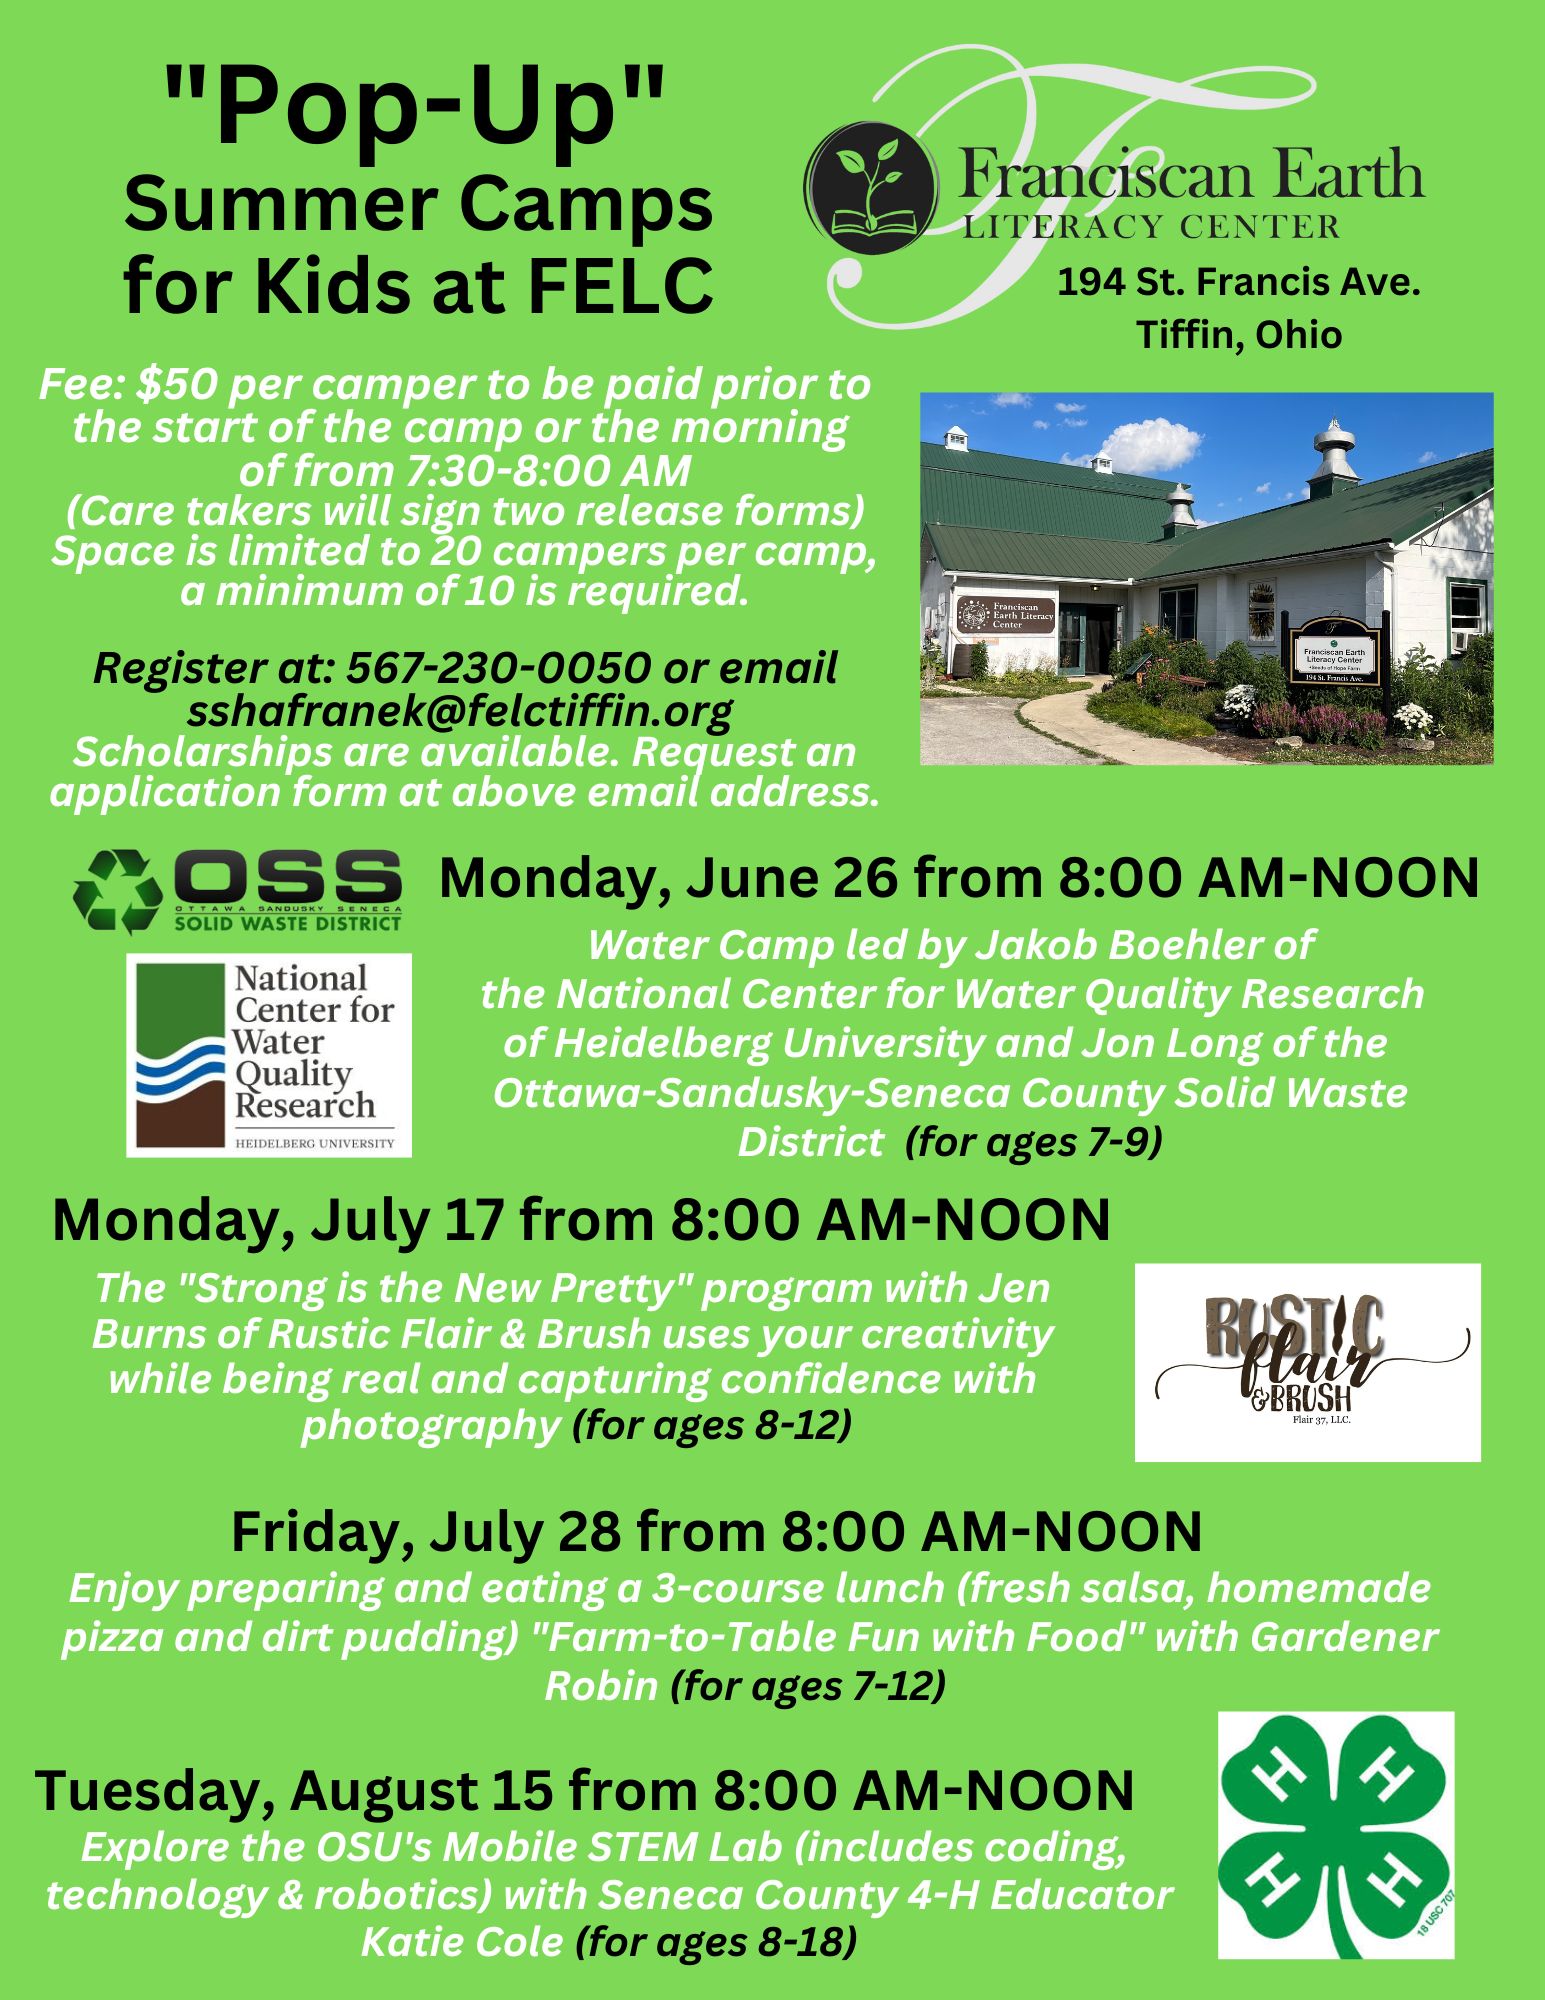 "Pop Up" Summer Camps at the Franciscan Earth Literacy Center